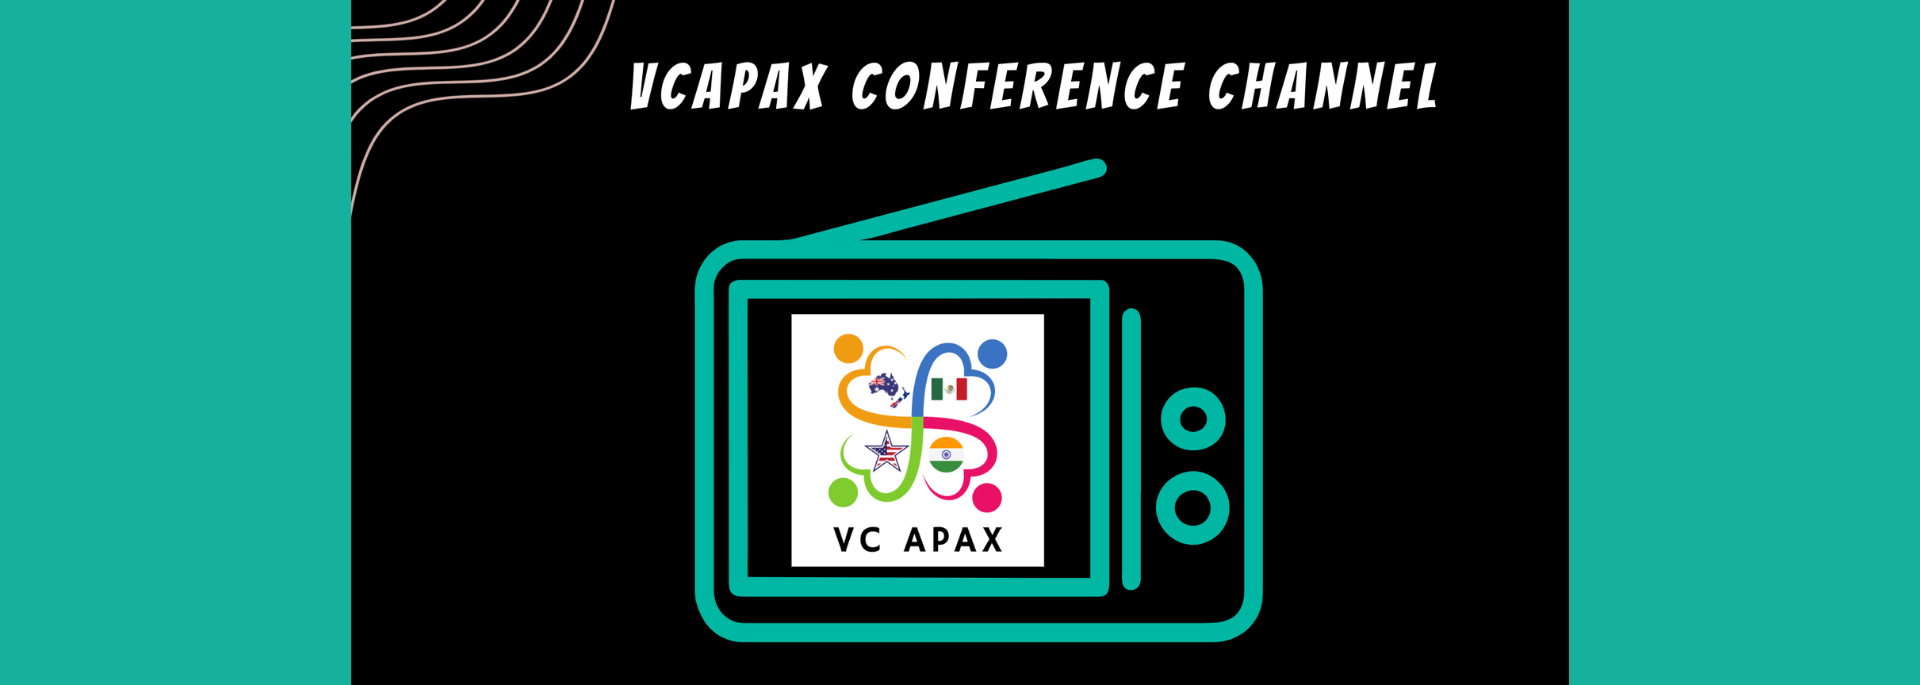 VCAPAX Conference